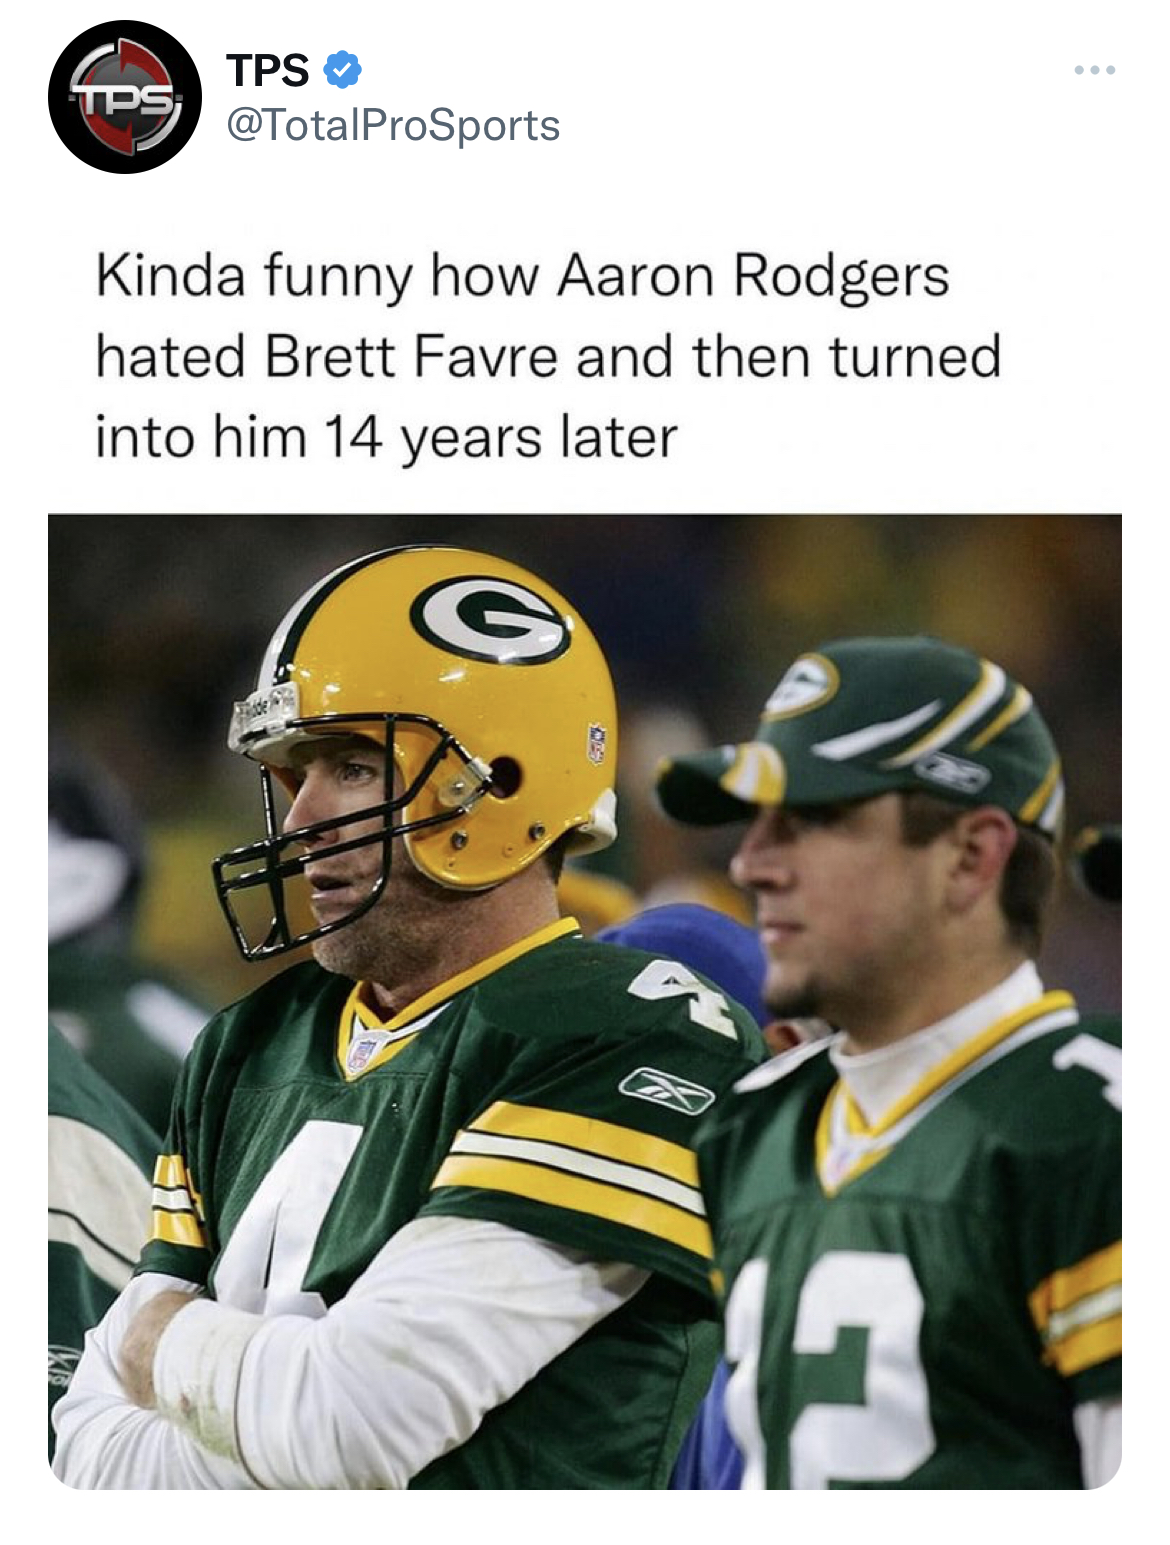 tweets roasting celebs - btett favre aaron rodgers - Tps Tps Kinda funny how Aaron Rodgers hated Brett Favre and then turned into him 14 years later